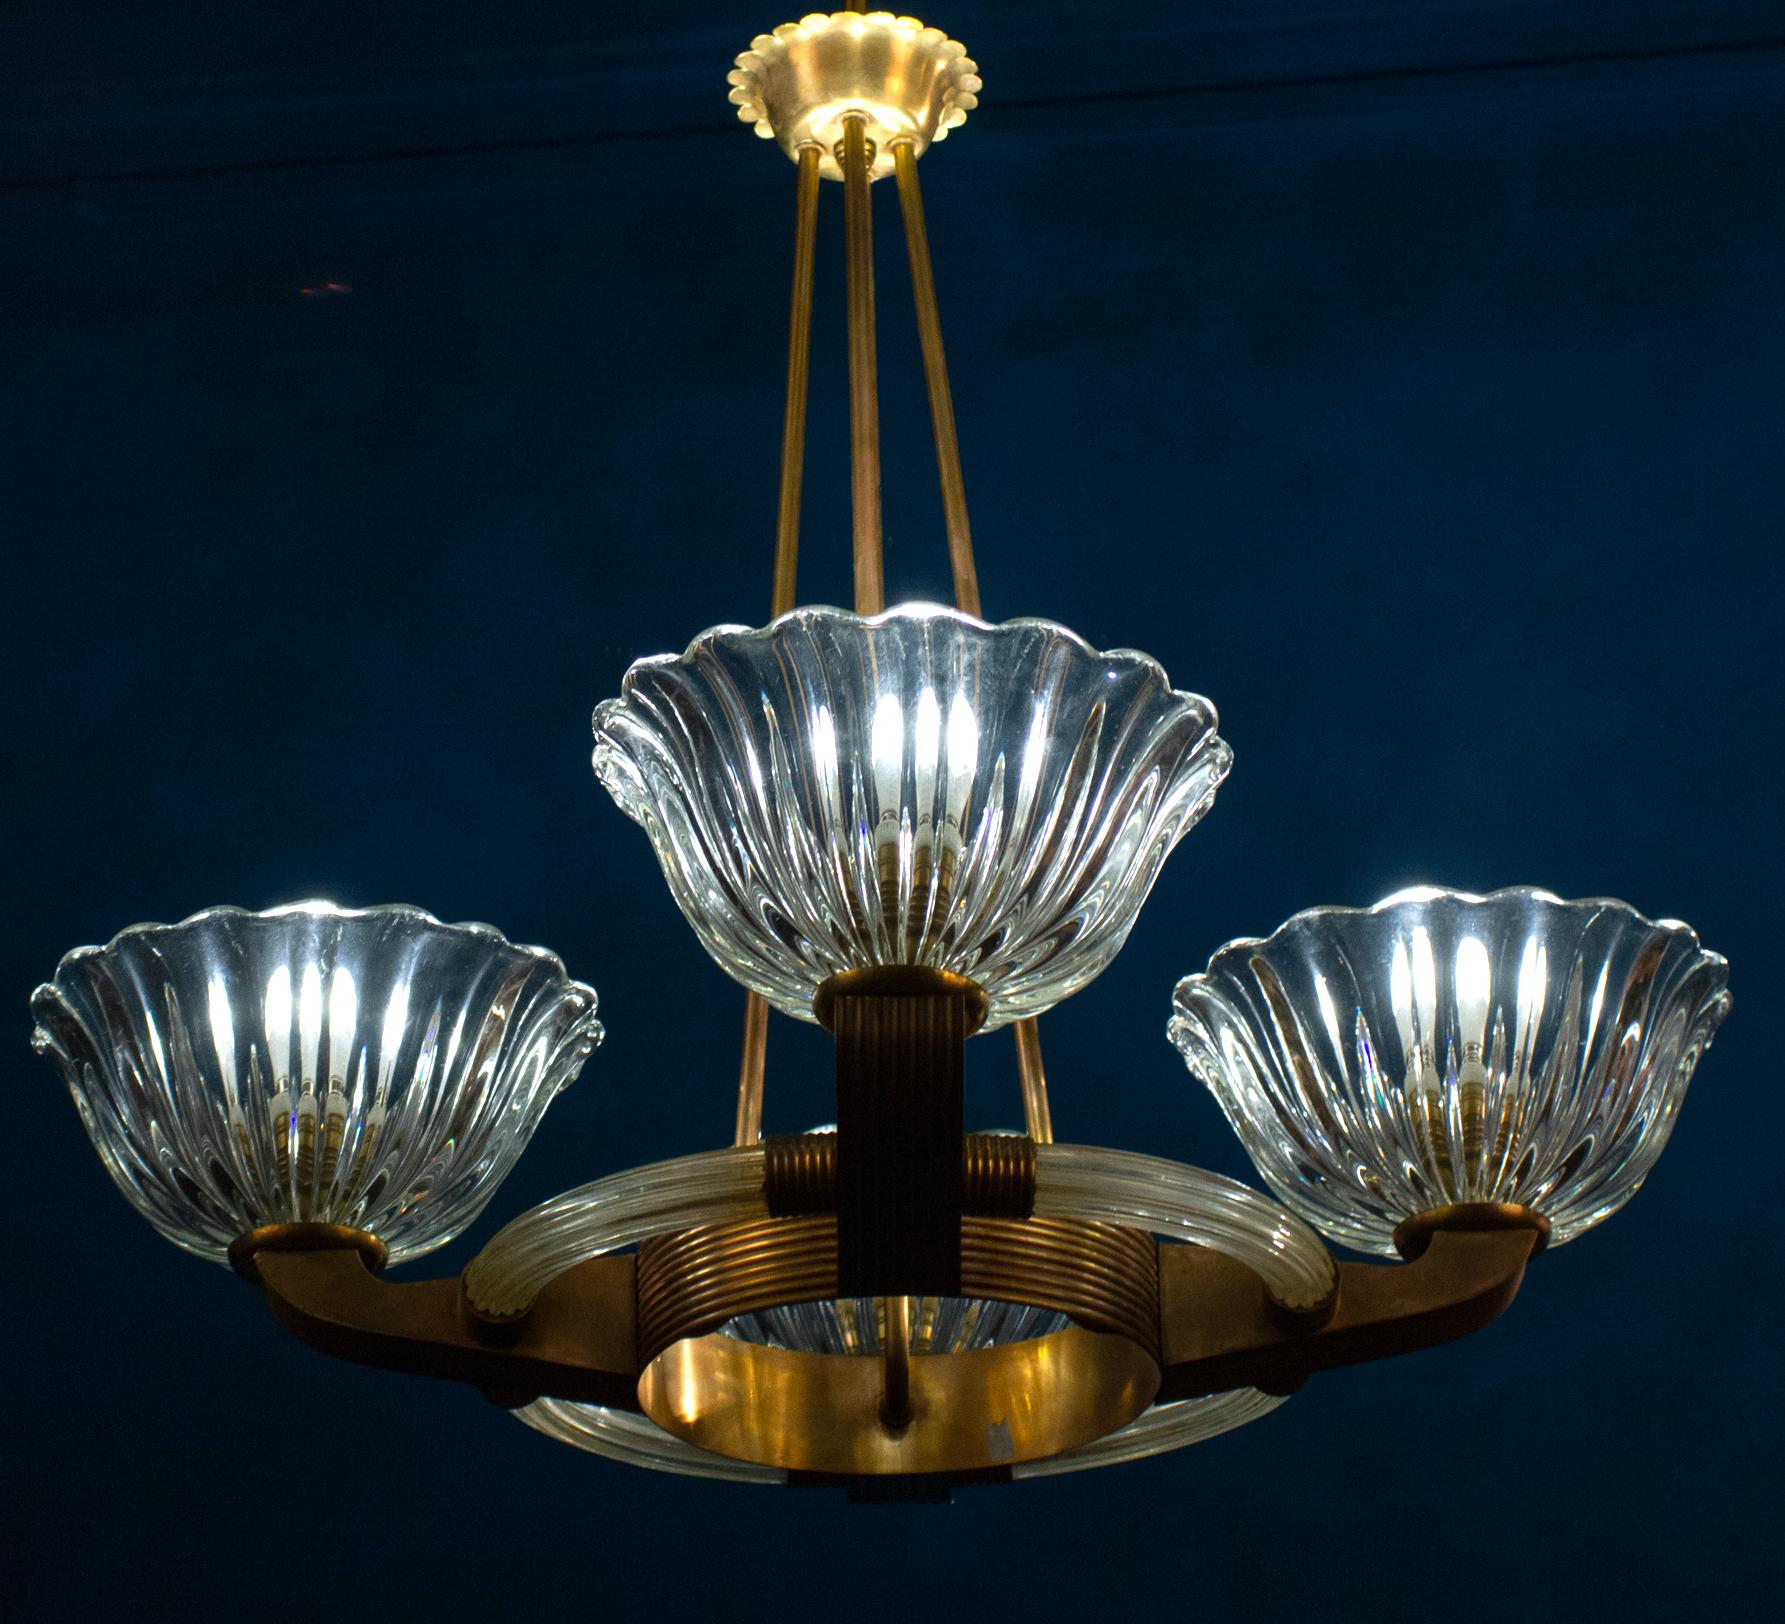 20th Century Art Deco Brass Mounted Murano Glass Chandelier by Barovier, 1940 For Sale